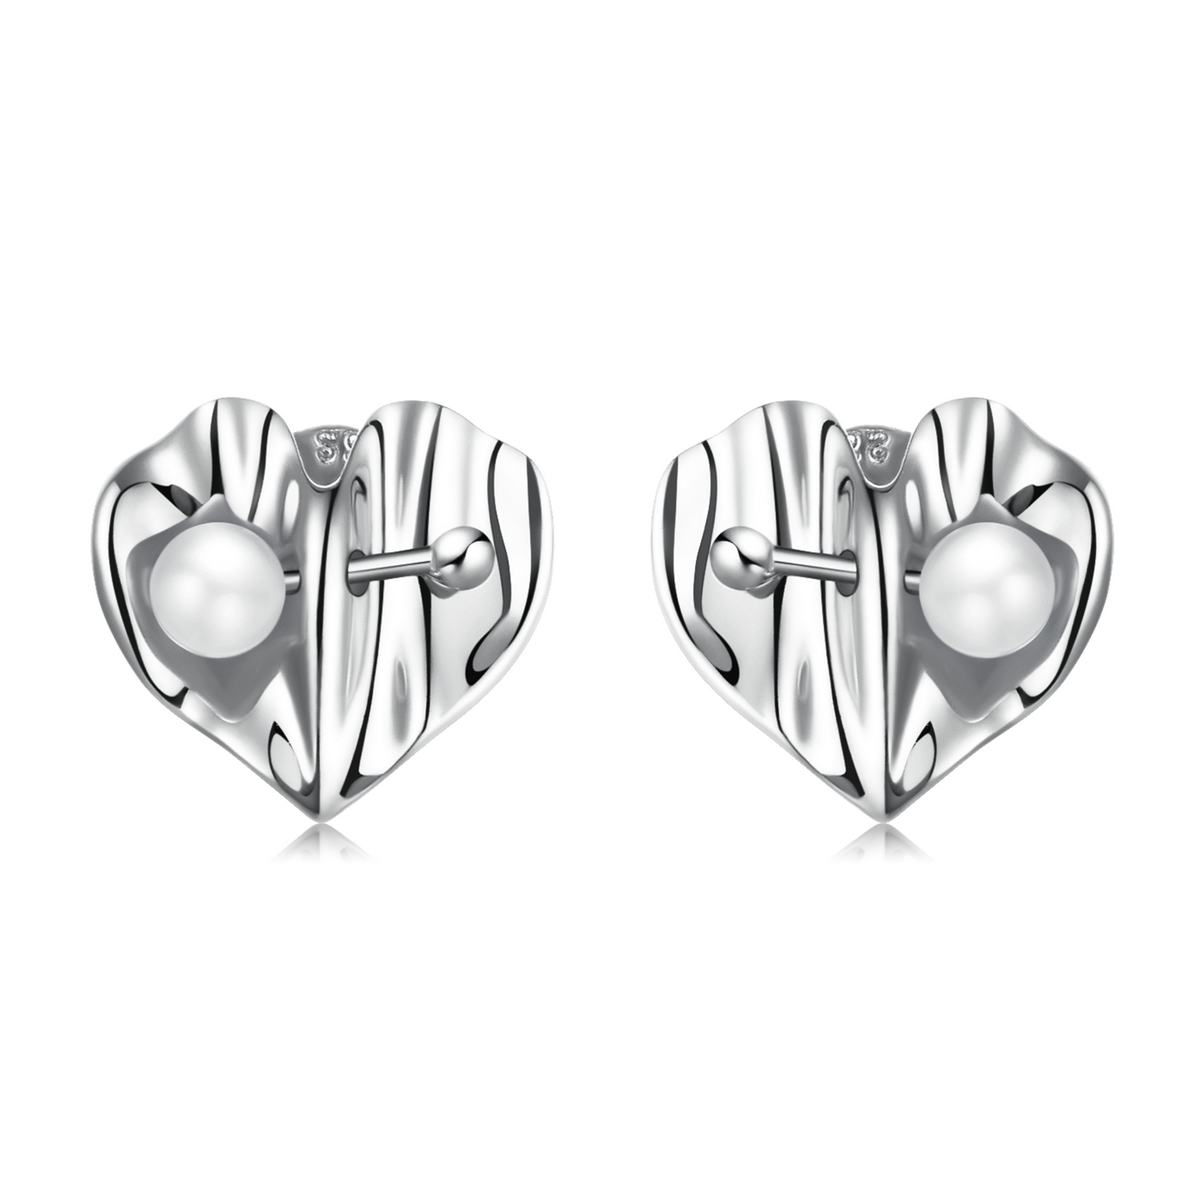 pandora style love shell beads texture stud earrings bse551 a